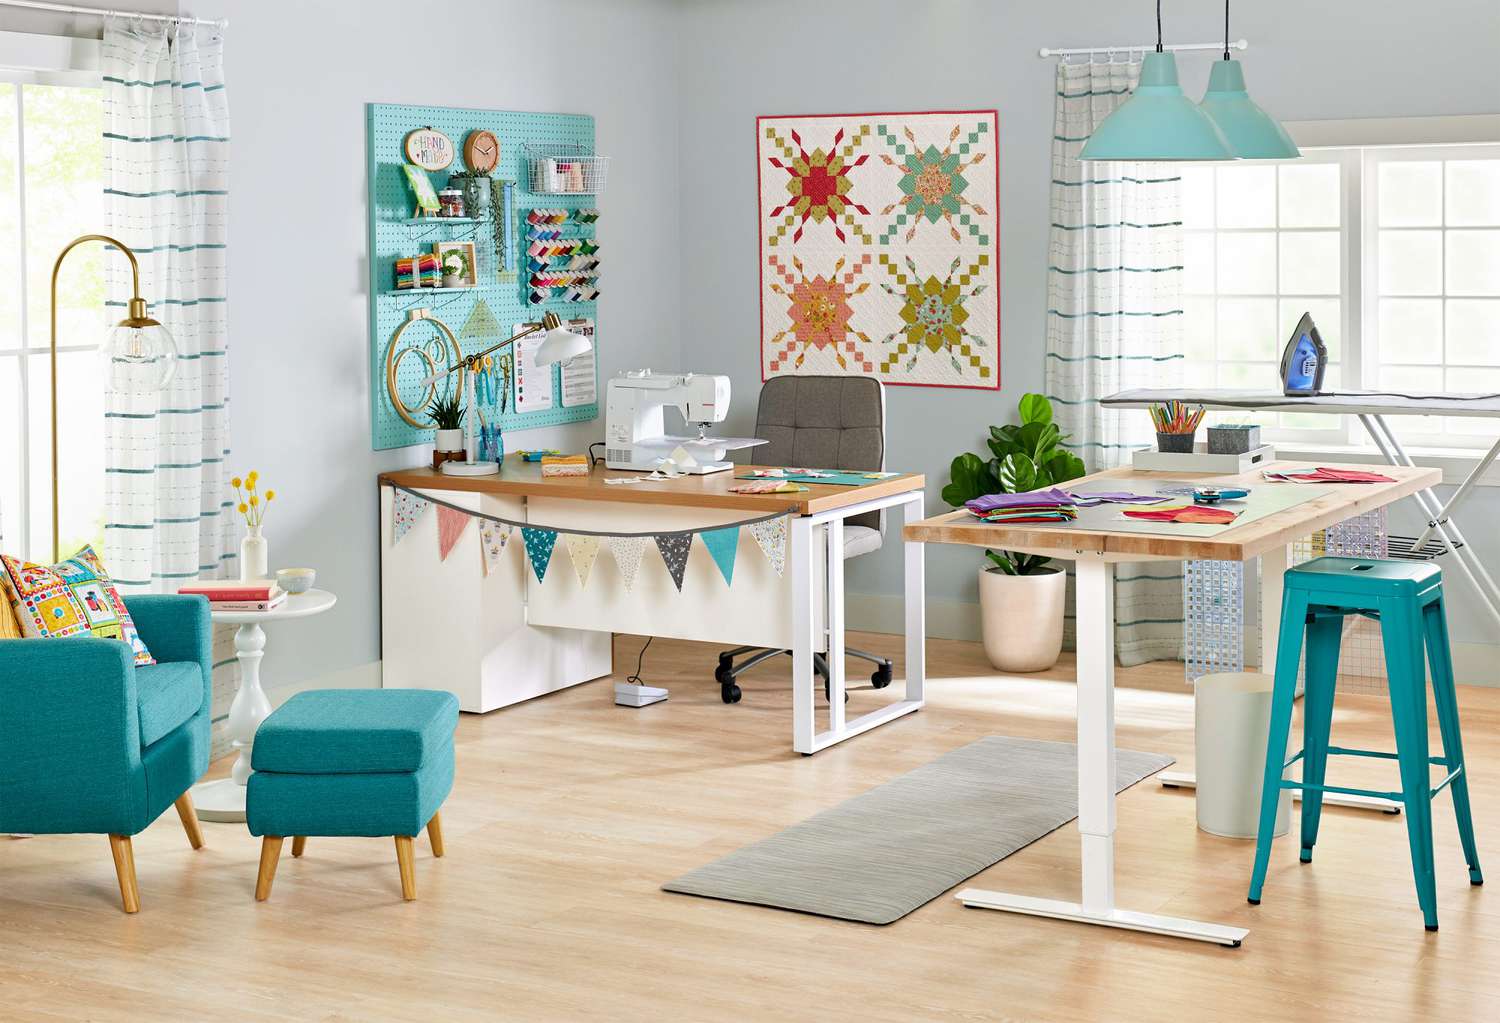 sewing room wall  Sewing room design, Sewing room inspiration, Sewing rooms